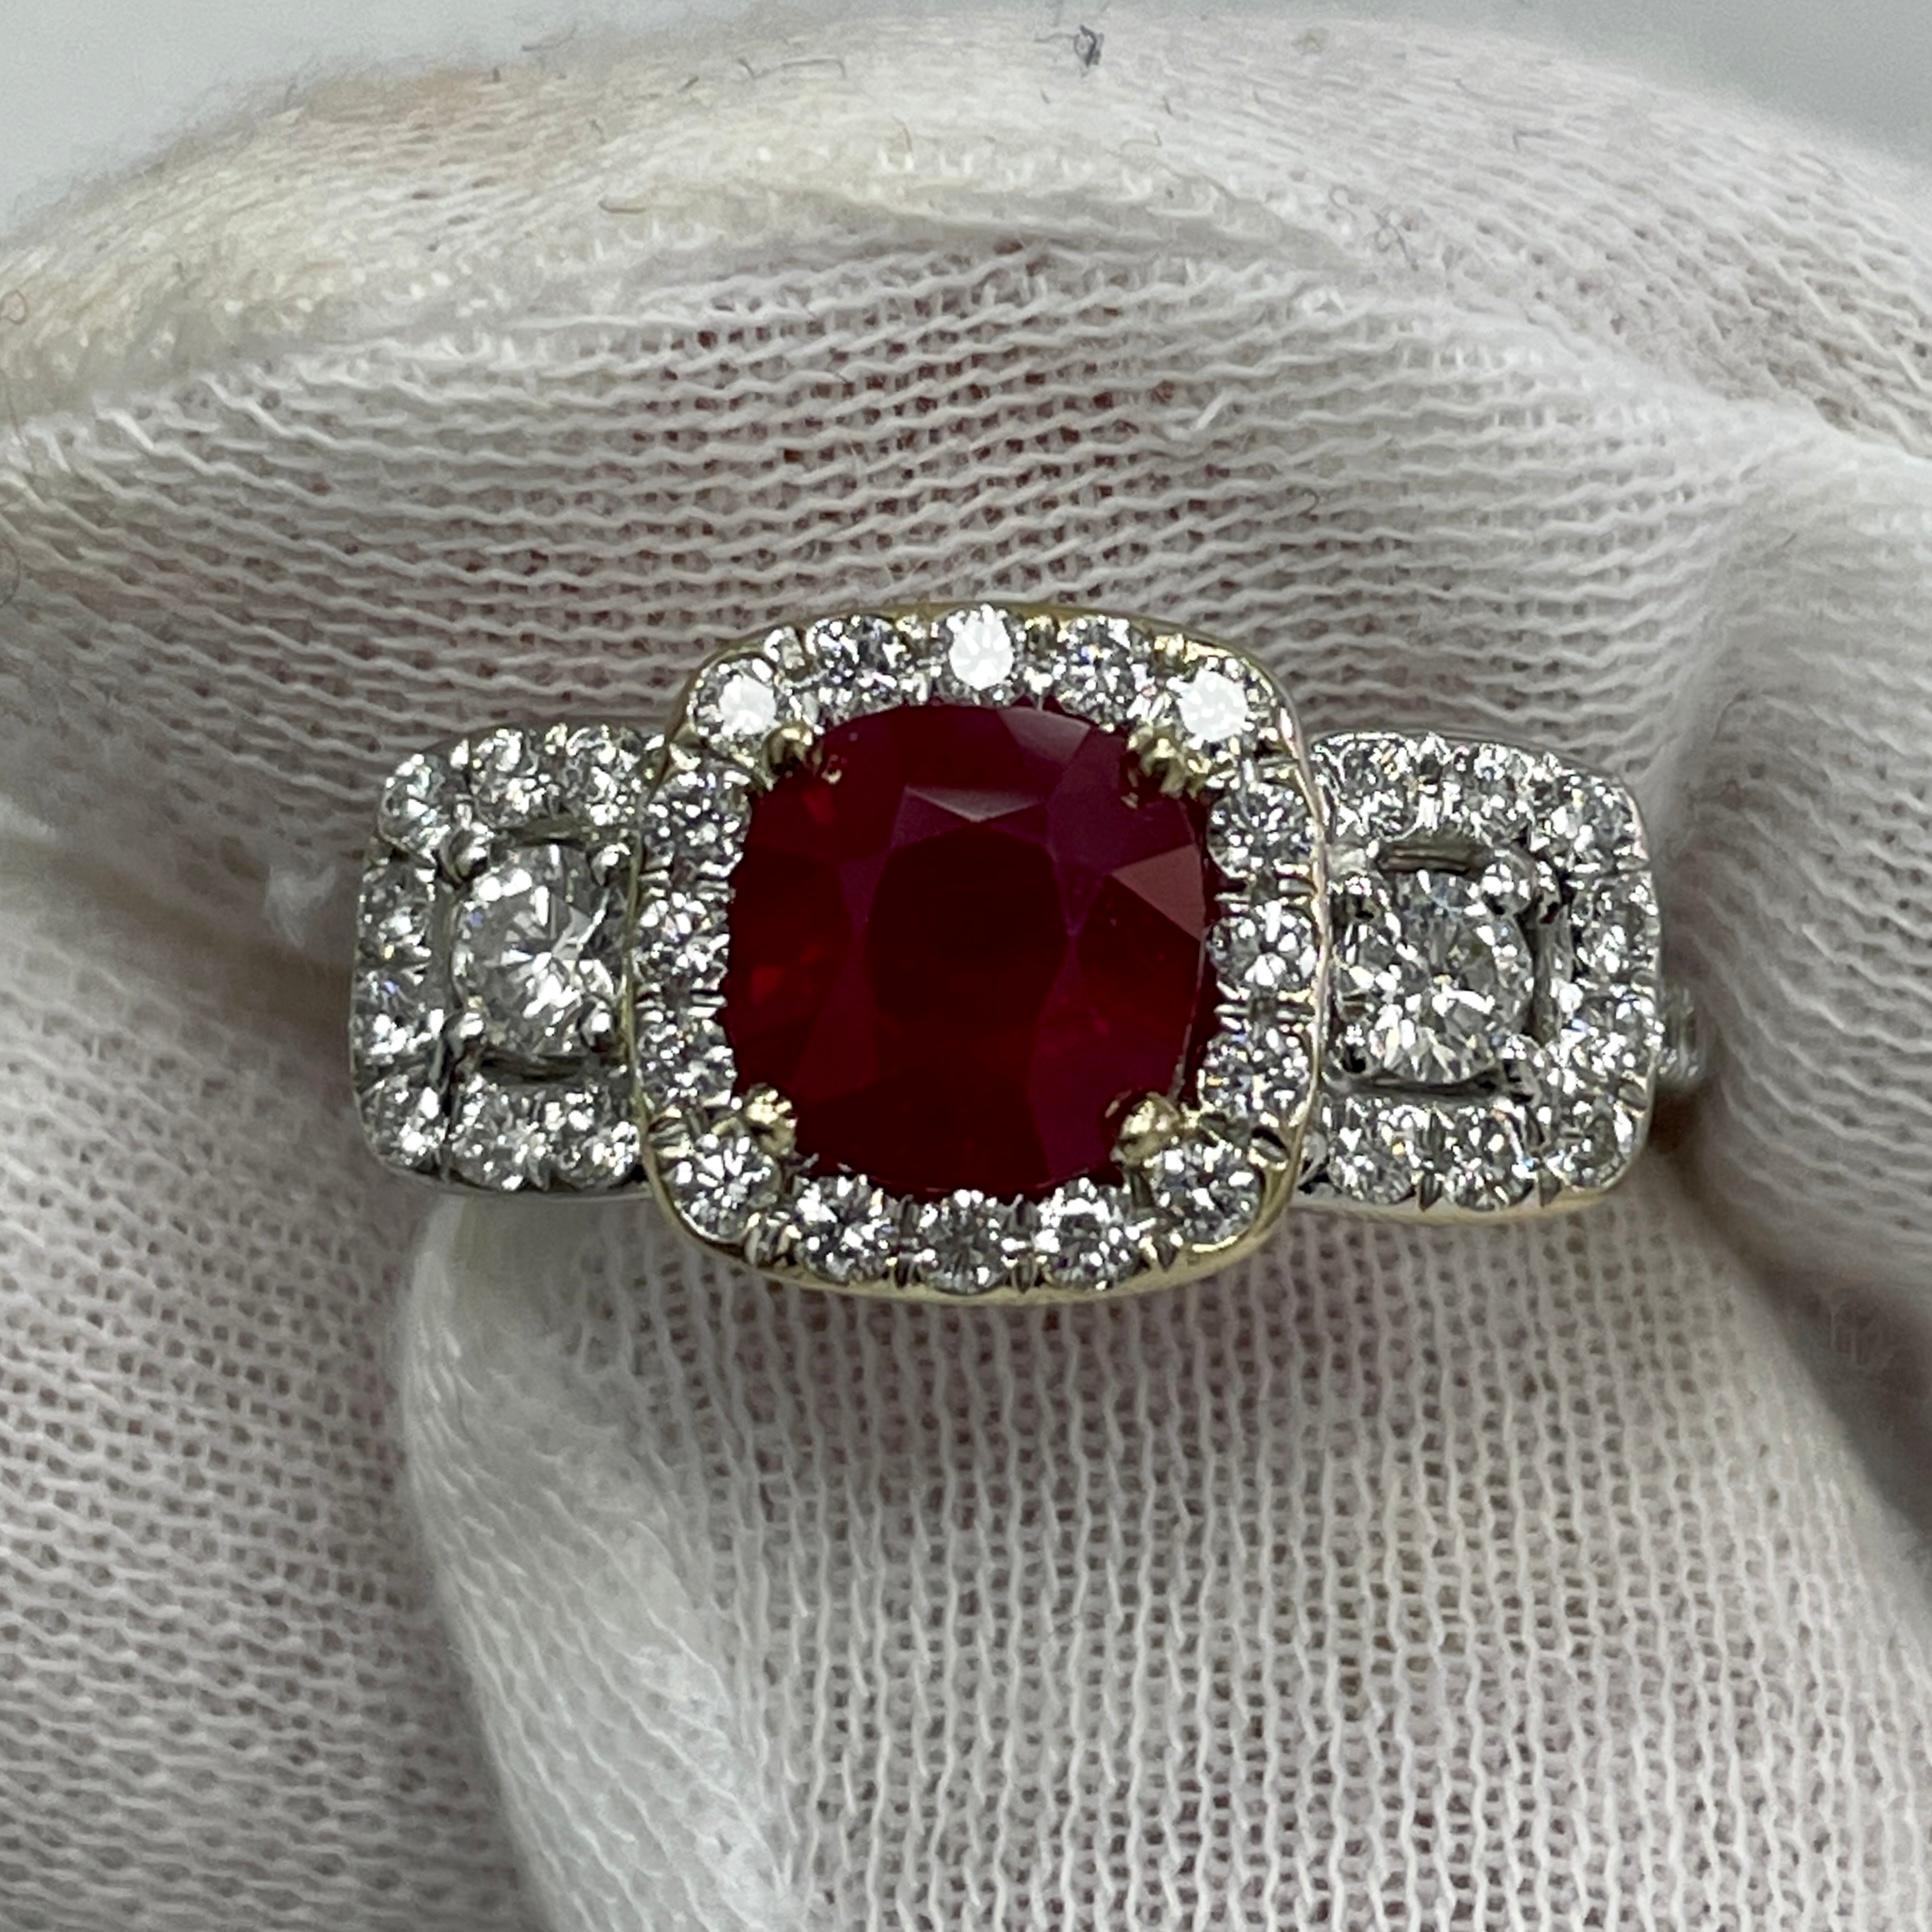 This saturated, stop sign red ruby is mounted in an eye catching 18K white gold ring with 0.87 carats of brilliant white diamonds.